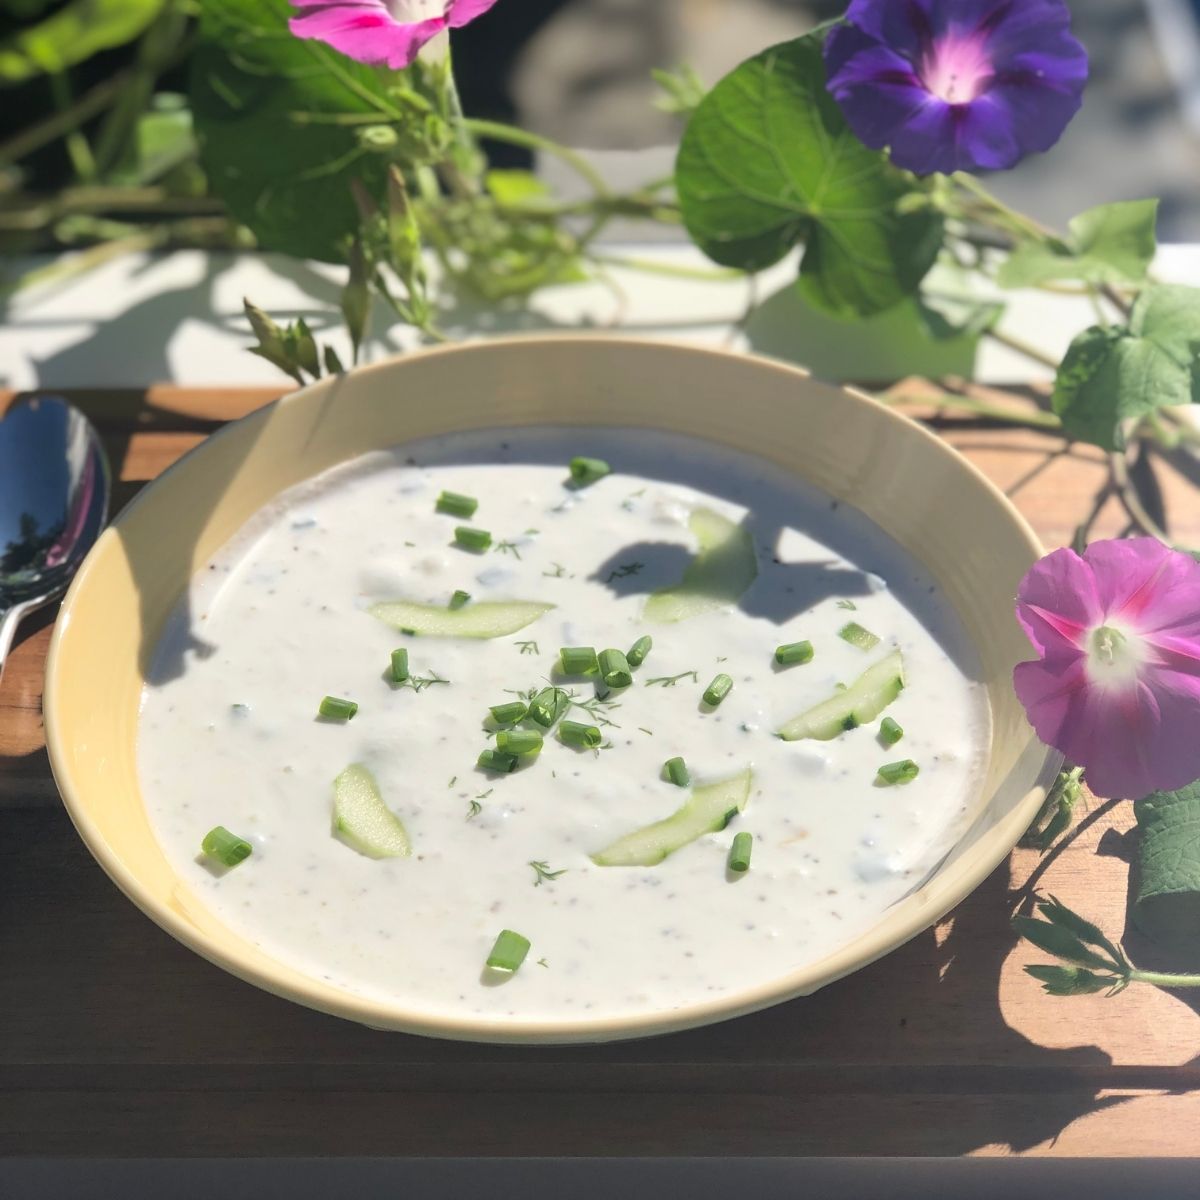 Chilled keto cucumber soup in a yellow bowl on a wooden table in a garden of pink and purple morning glories